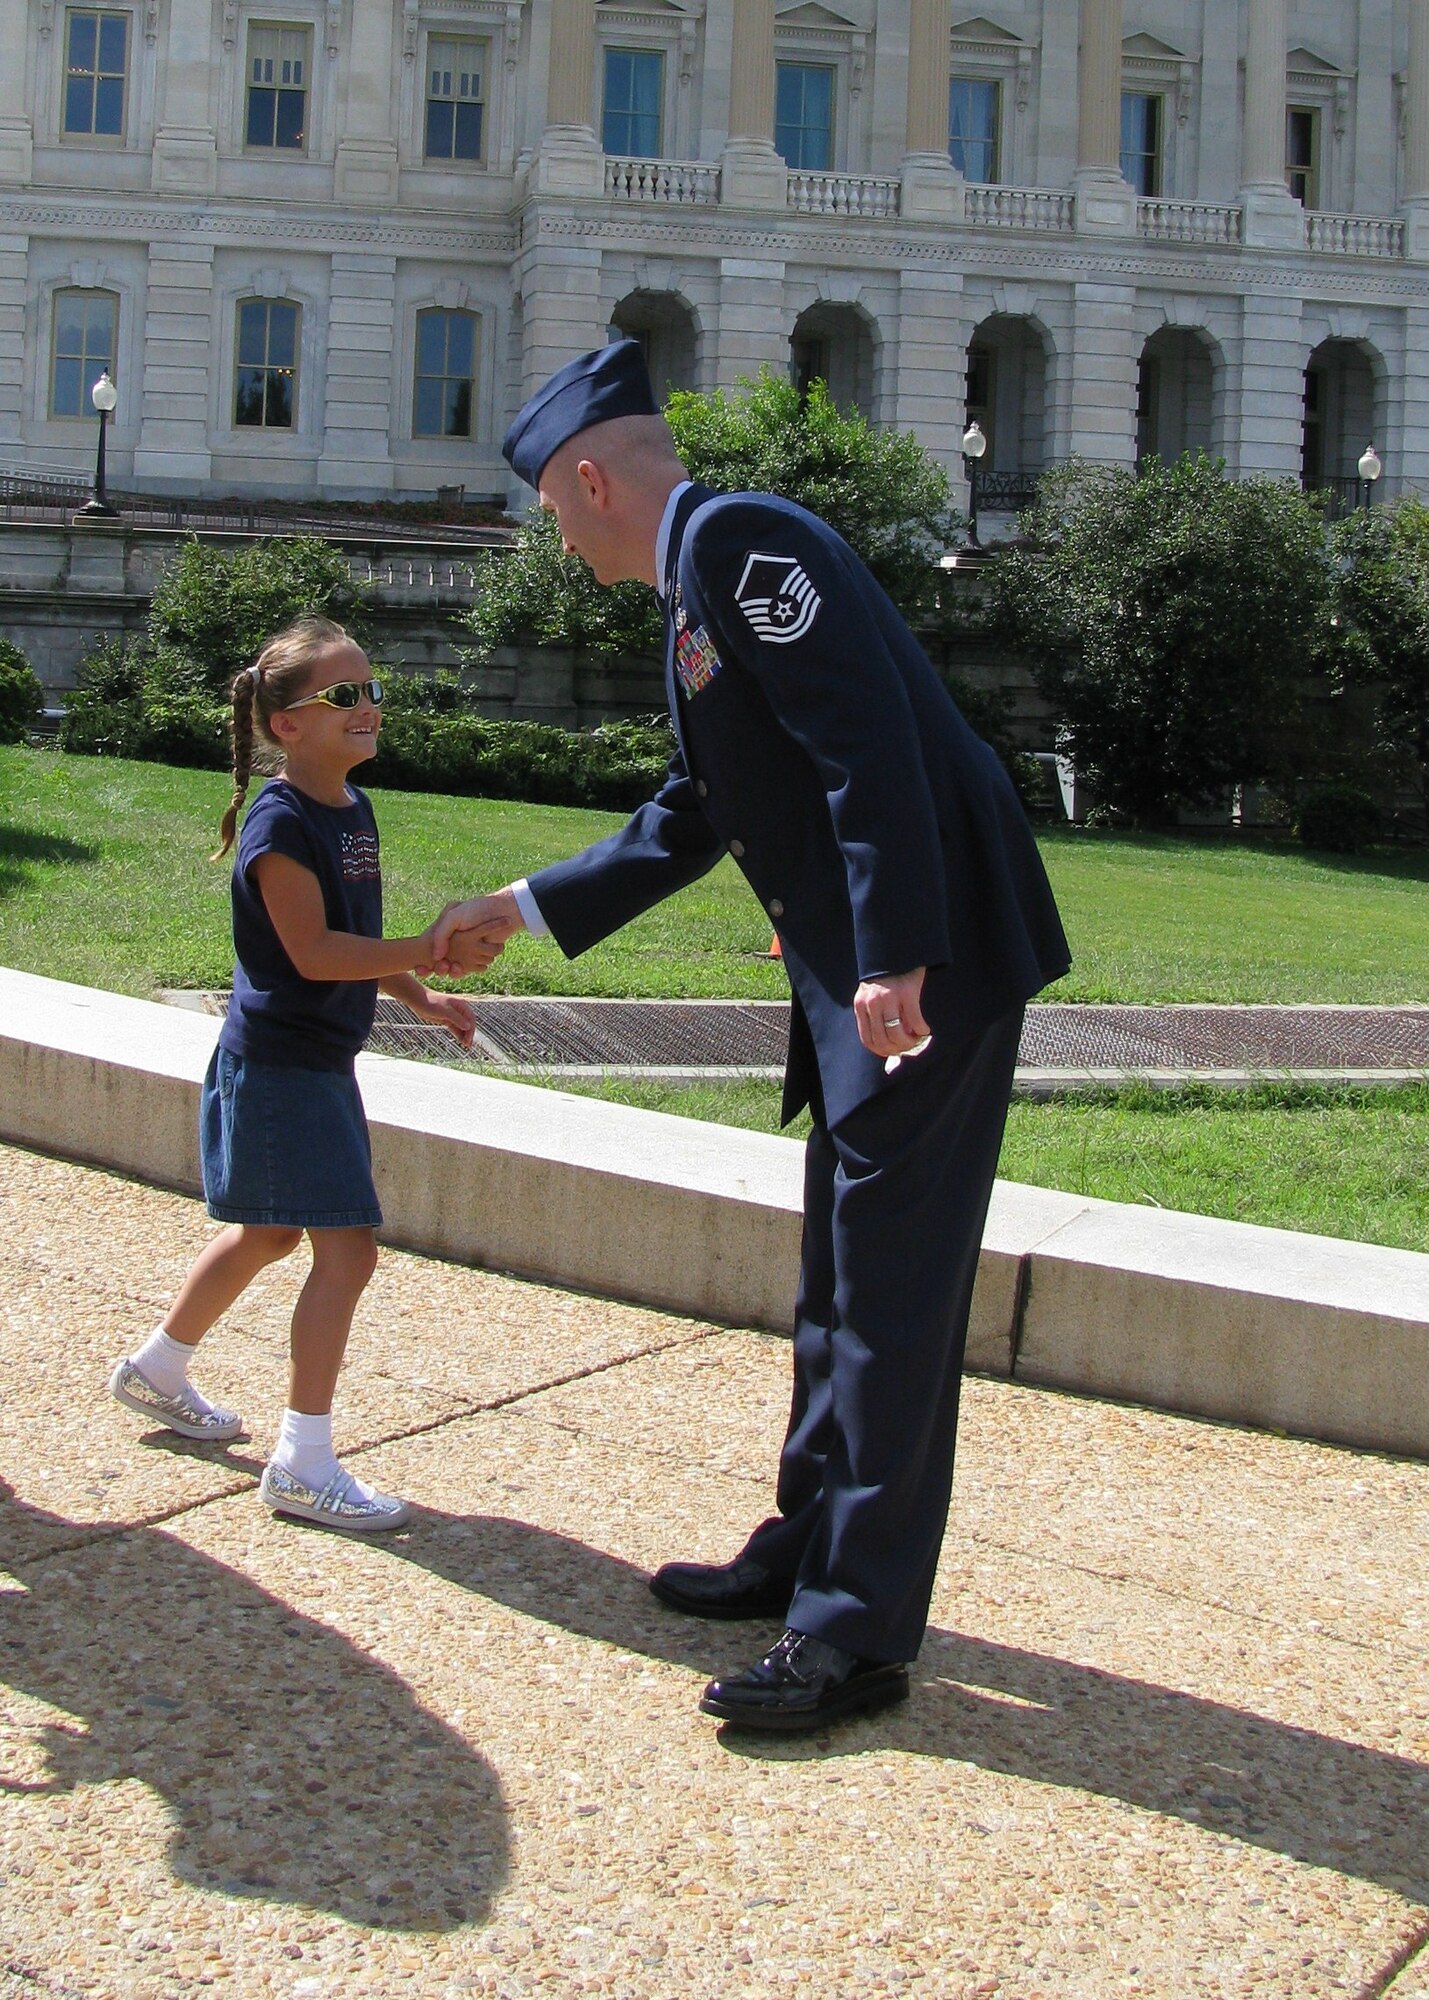 Master Sgt. Stephen Hunter, 944th Civil Engineer Squadron Explosive Ordnance Disposal technican, shakes hands with a girl during a trip to Washington D.C. where he received accolades as one of the 12 Outstanding Airmen of the Year 2010. Sergeant Hunter attended a week of events highlighted by a formal dinner honoring the 12 OAY recipients at the Air Force Association's Air and Space Conference and Technology Exposition. (Courtesy photo)